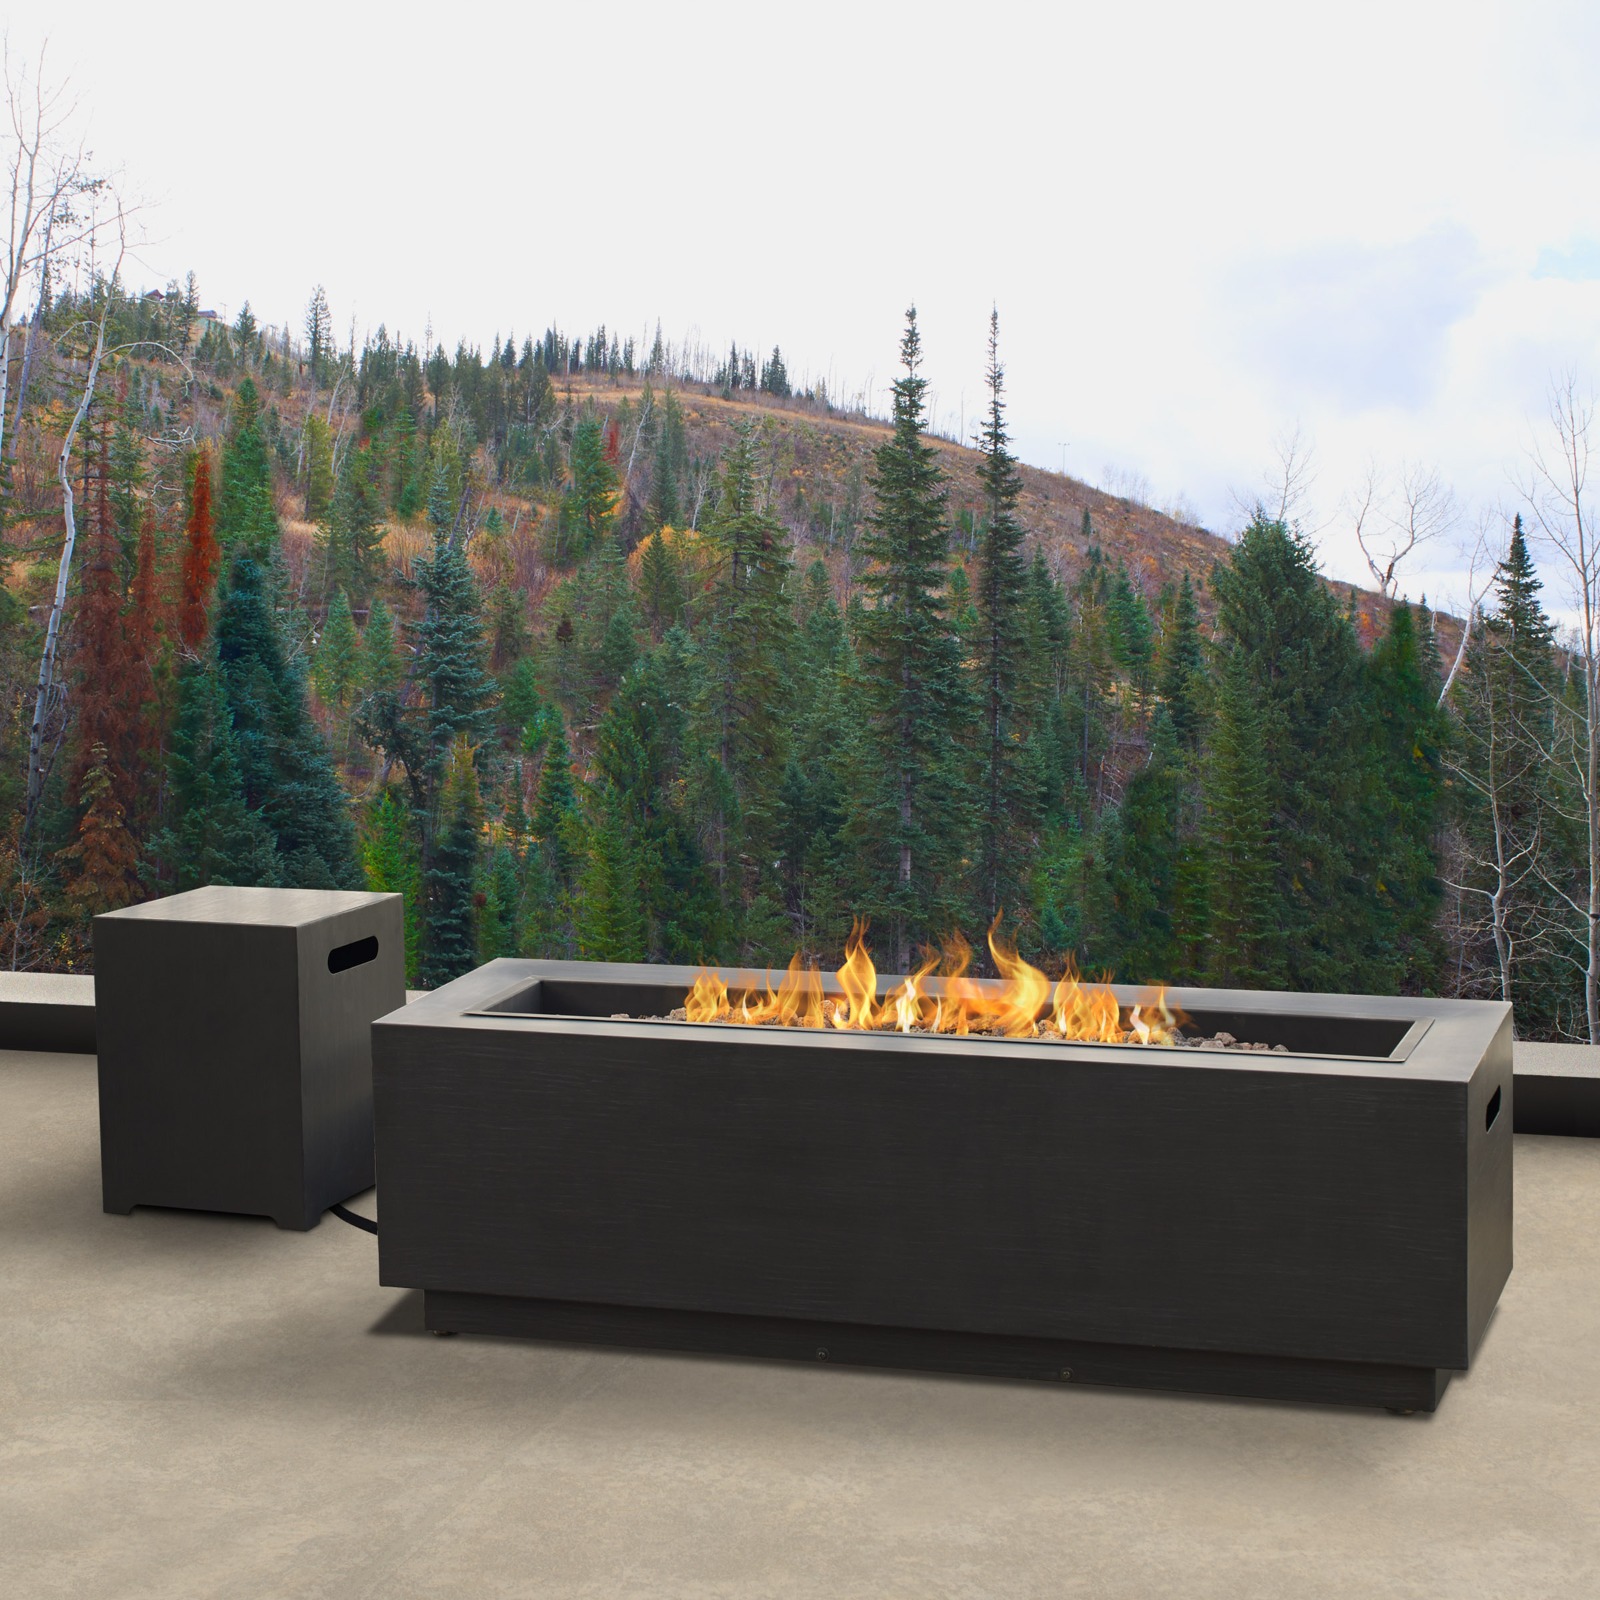 Lanesboro Outdoor Propane Fire Pit Fireplace Fire Table for Backyard or Patio with Natural Gas Conversion Kit